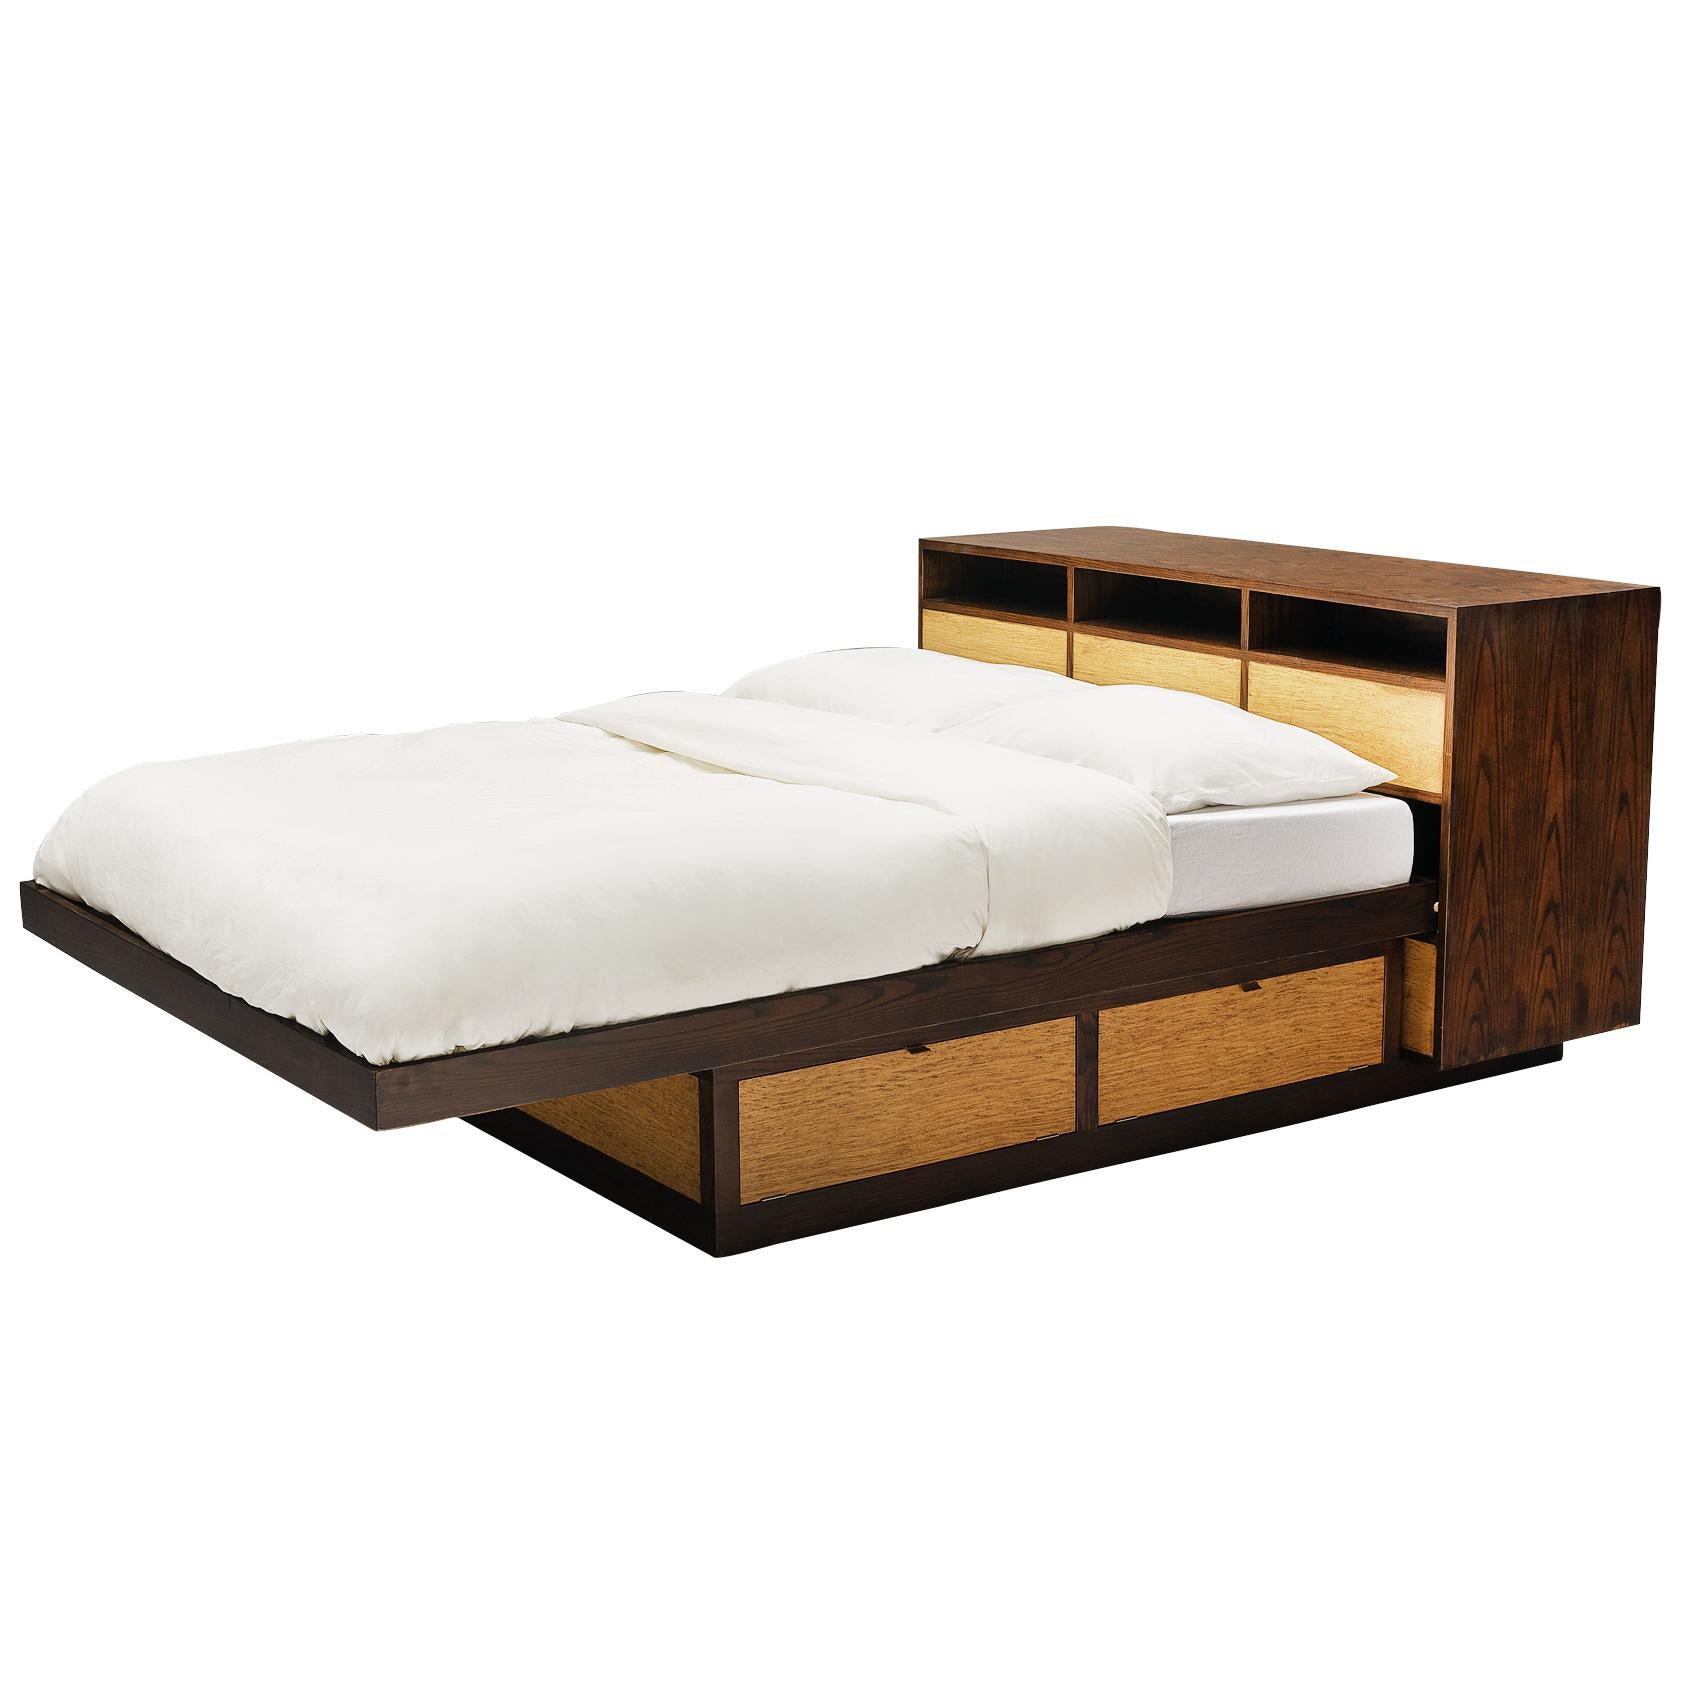 Edward Wormley Free-Standing Queen Size Bed with Drawers 